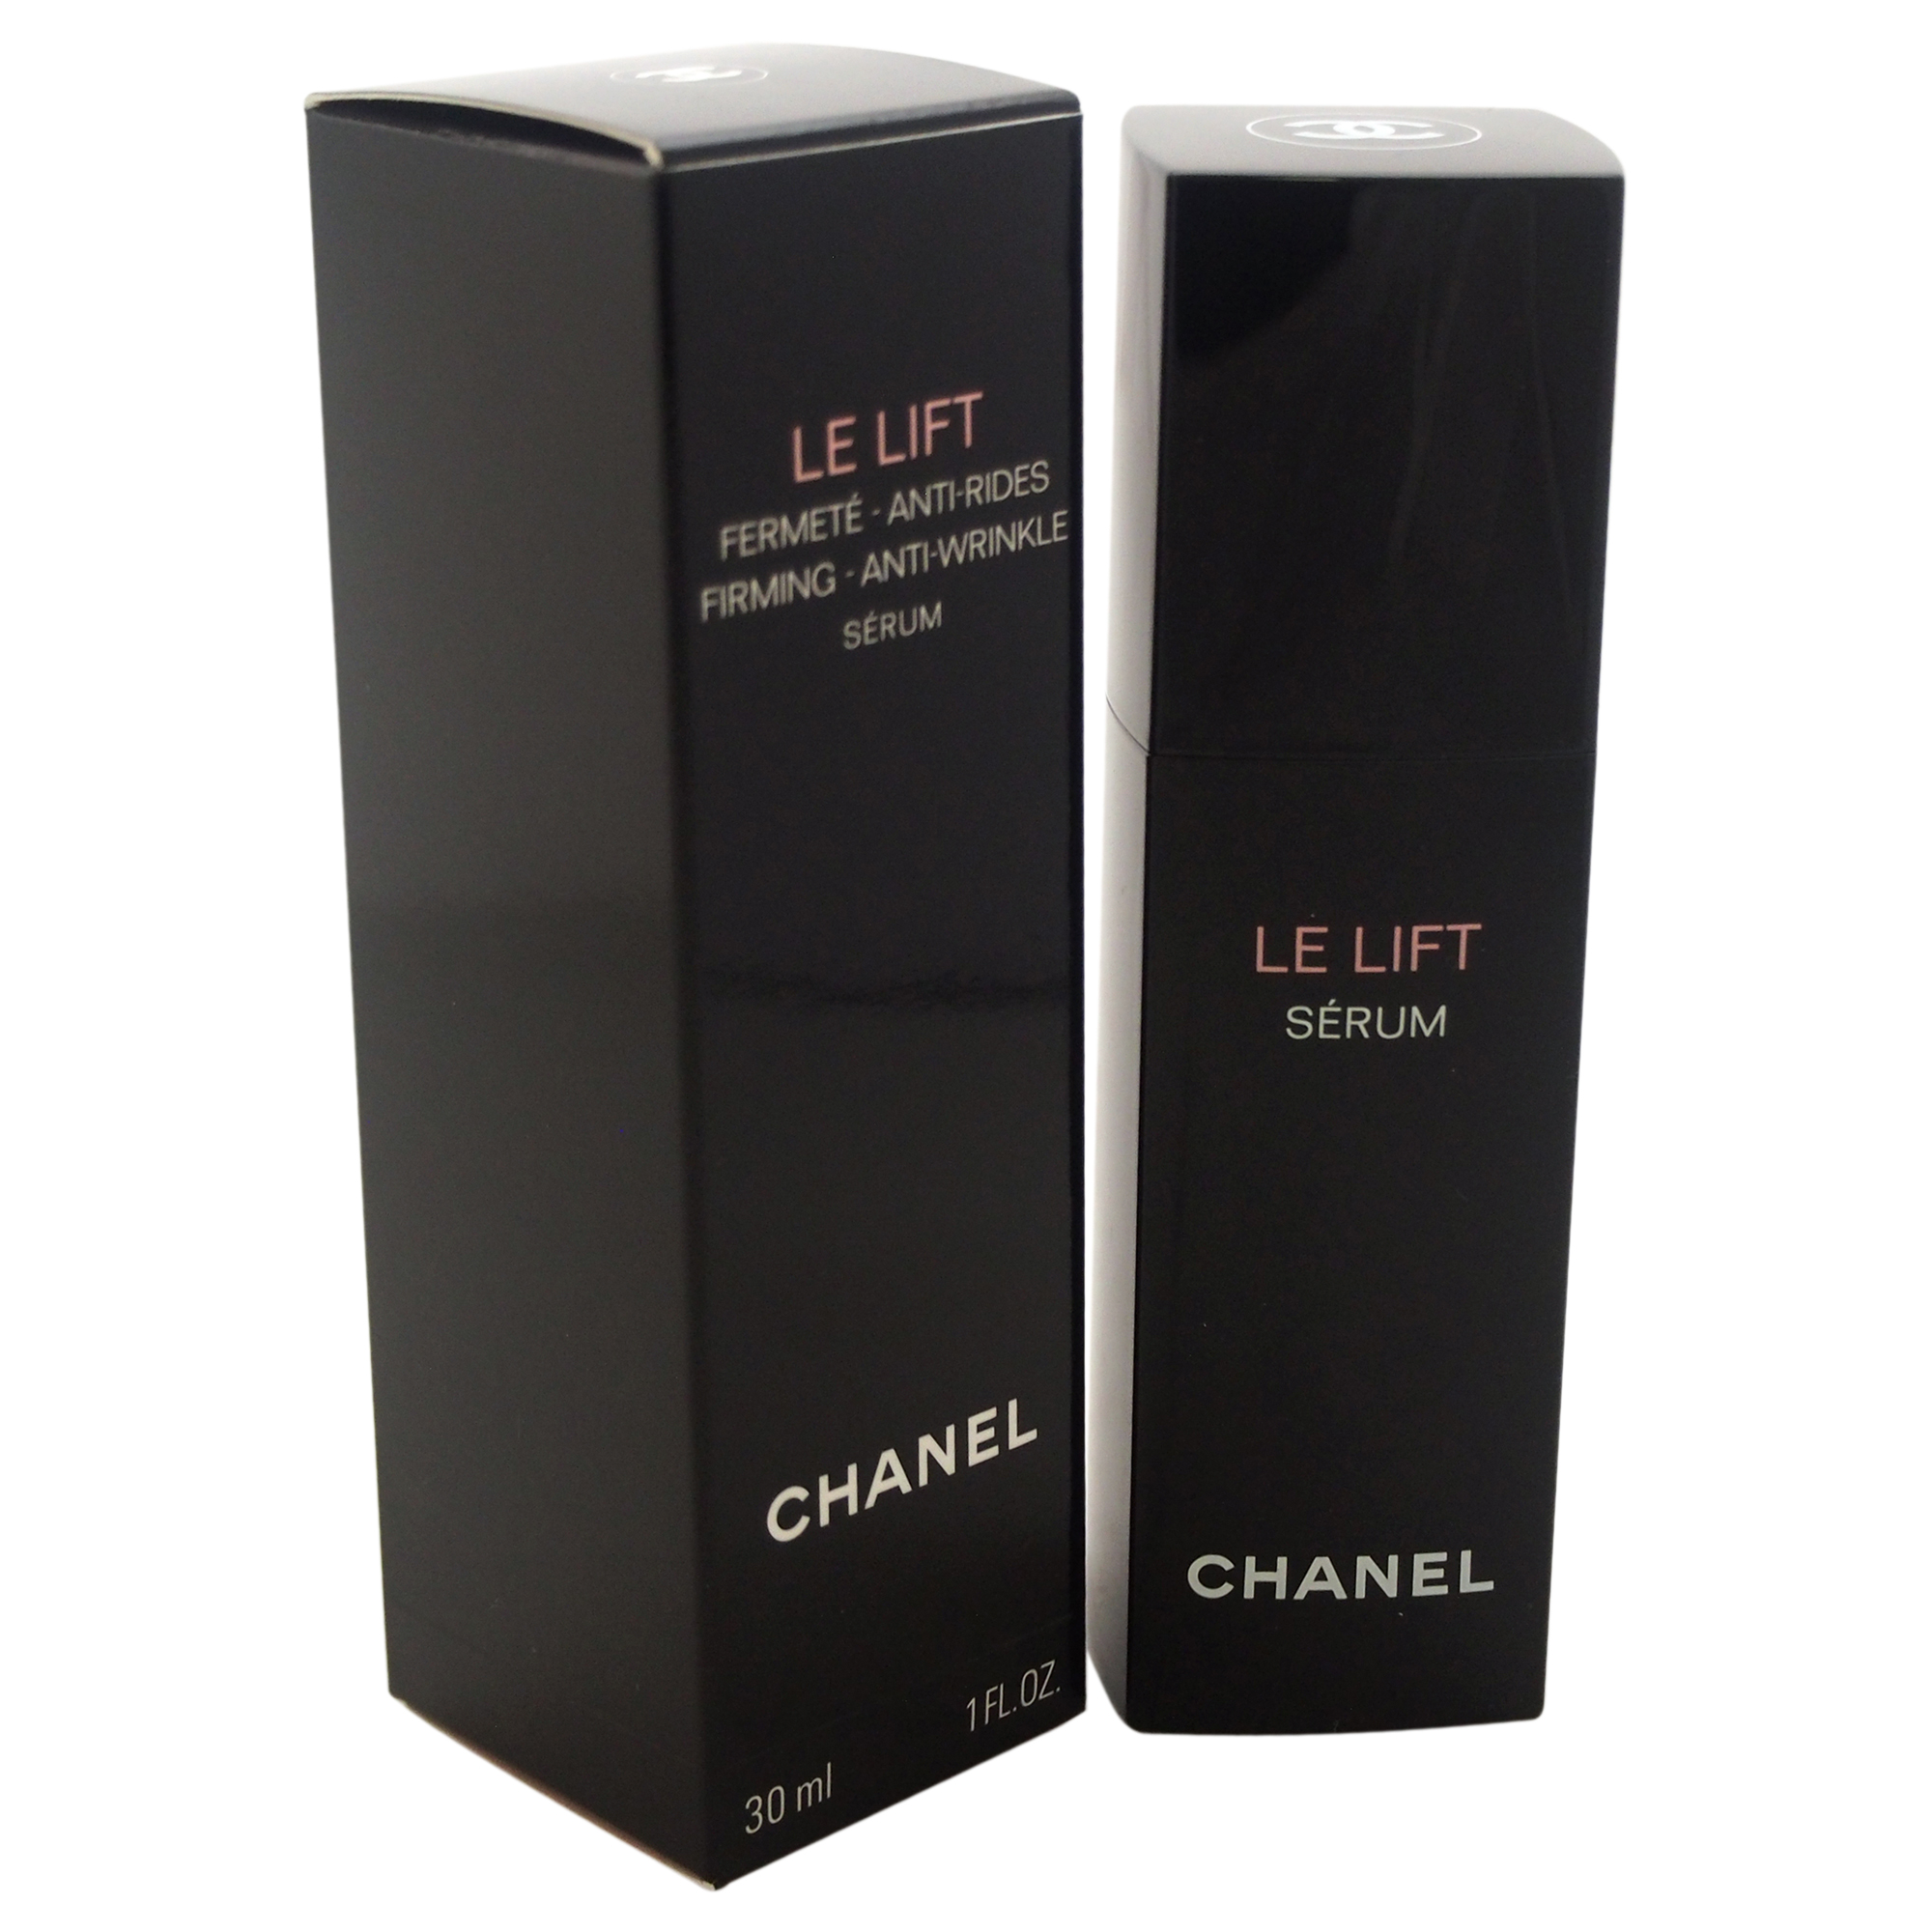 Le Lift Firming - Anti-Wrinkle Serum by Chanel for Unisex - 1 oz Serum